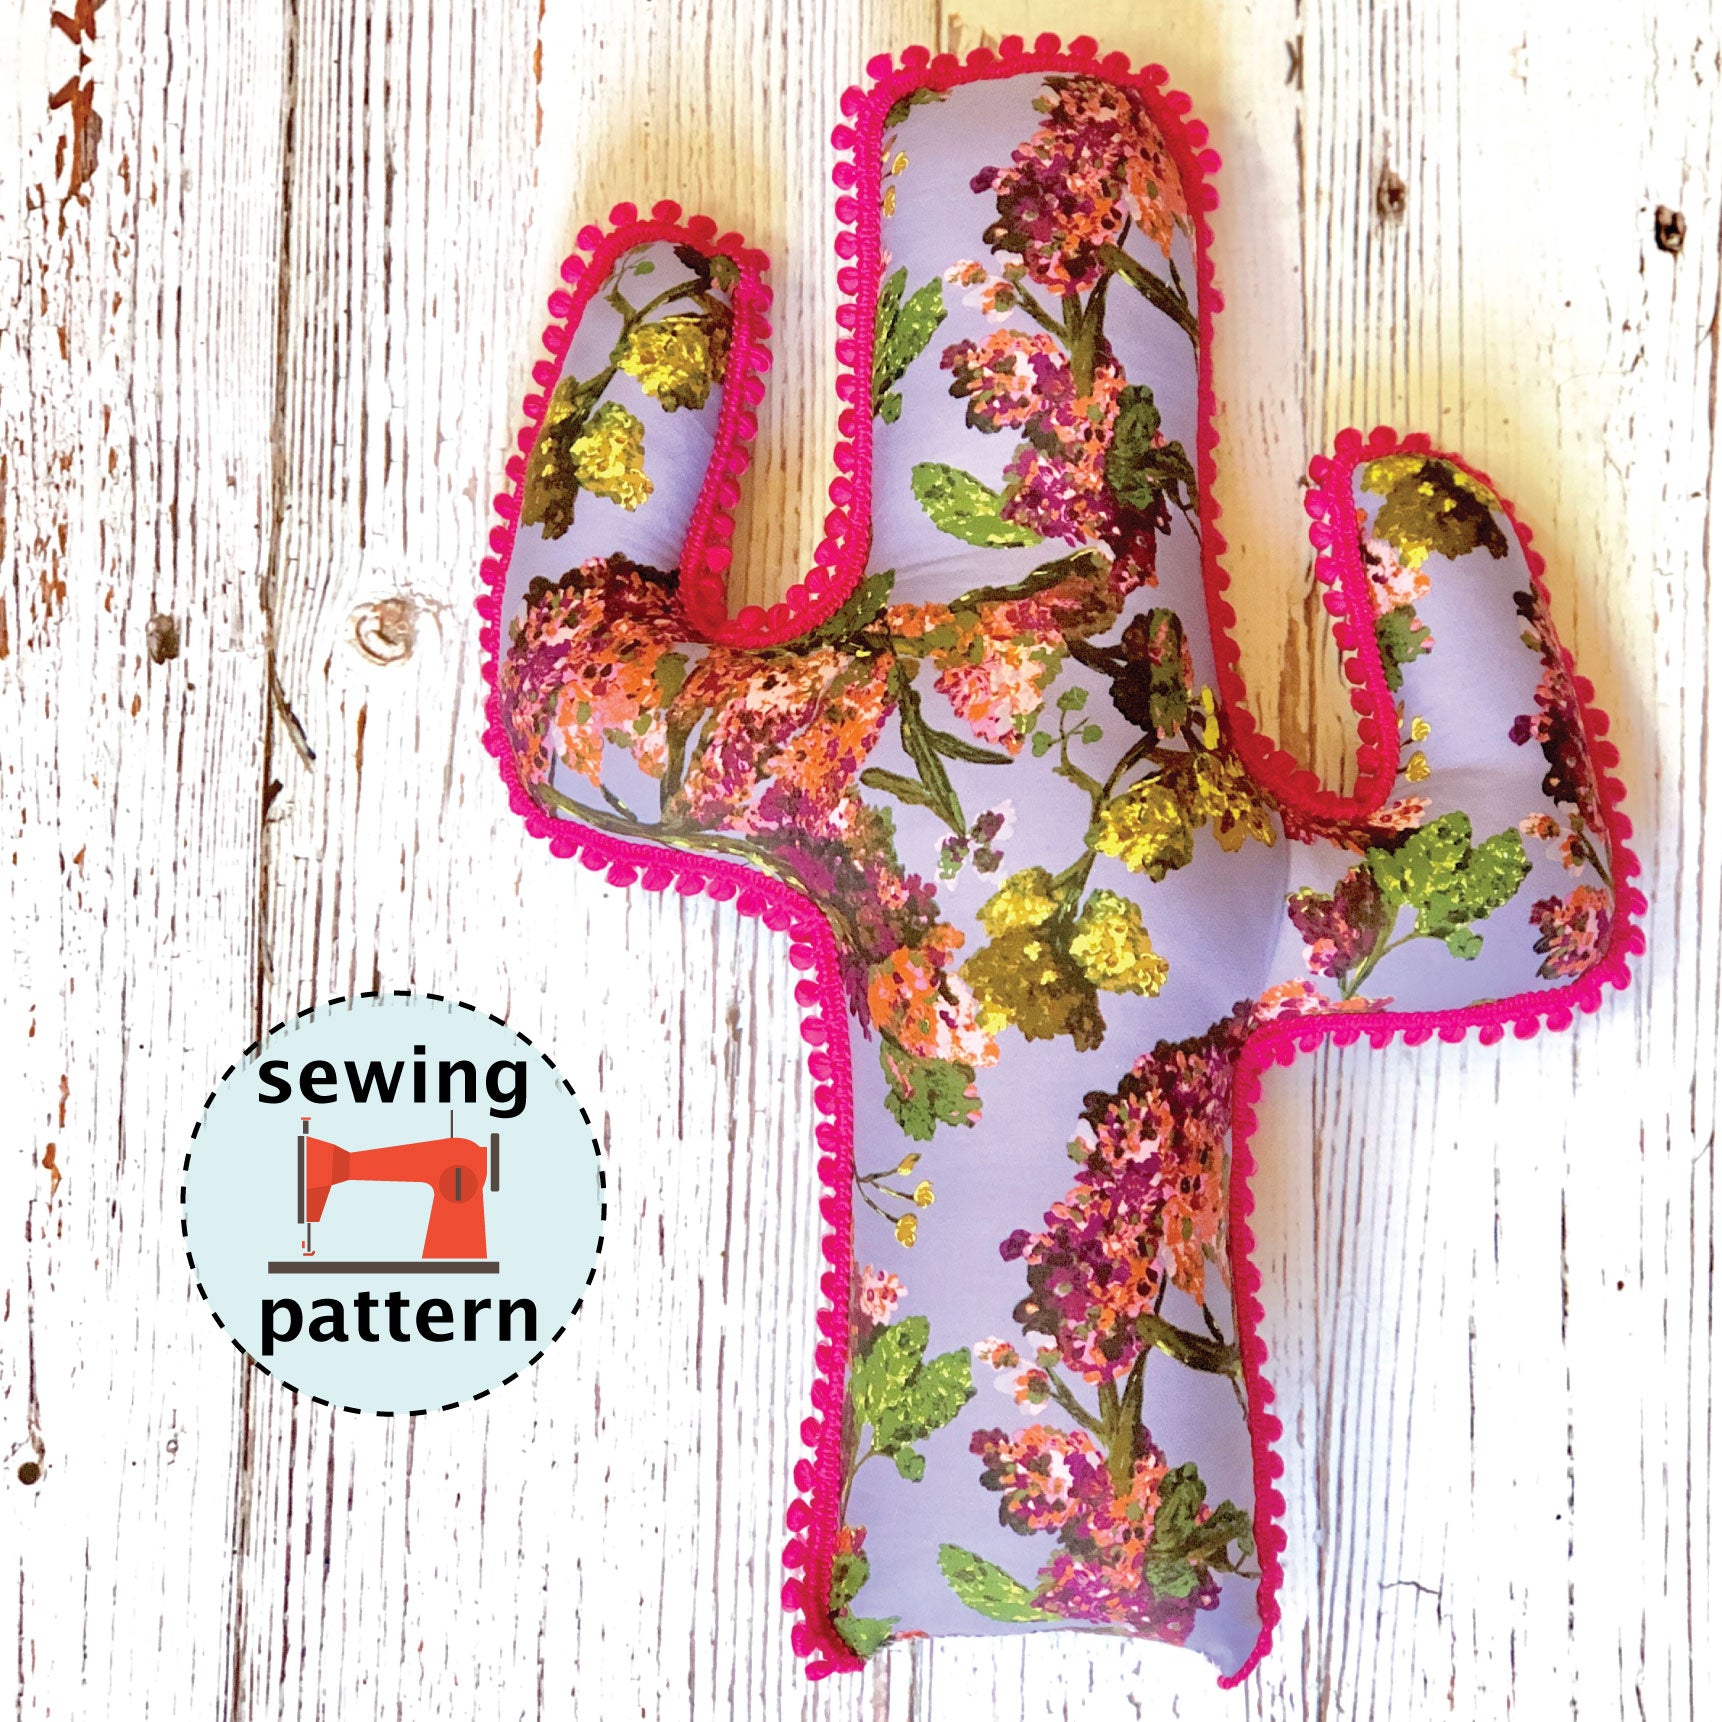 Cactus Cuddler Sewing Pattern - Sewing Instructions and Pattern - Stuffed Cactus - 4 sizes Plushy - PDF Download